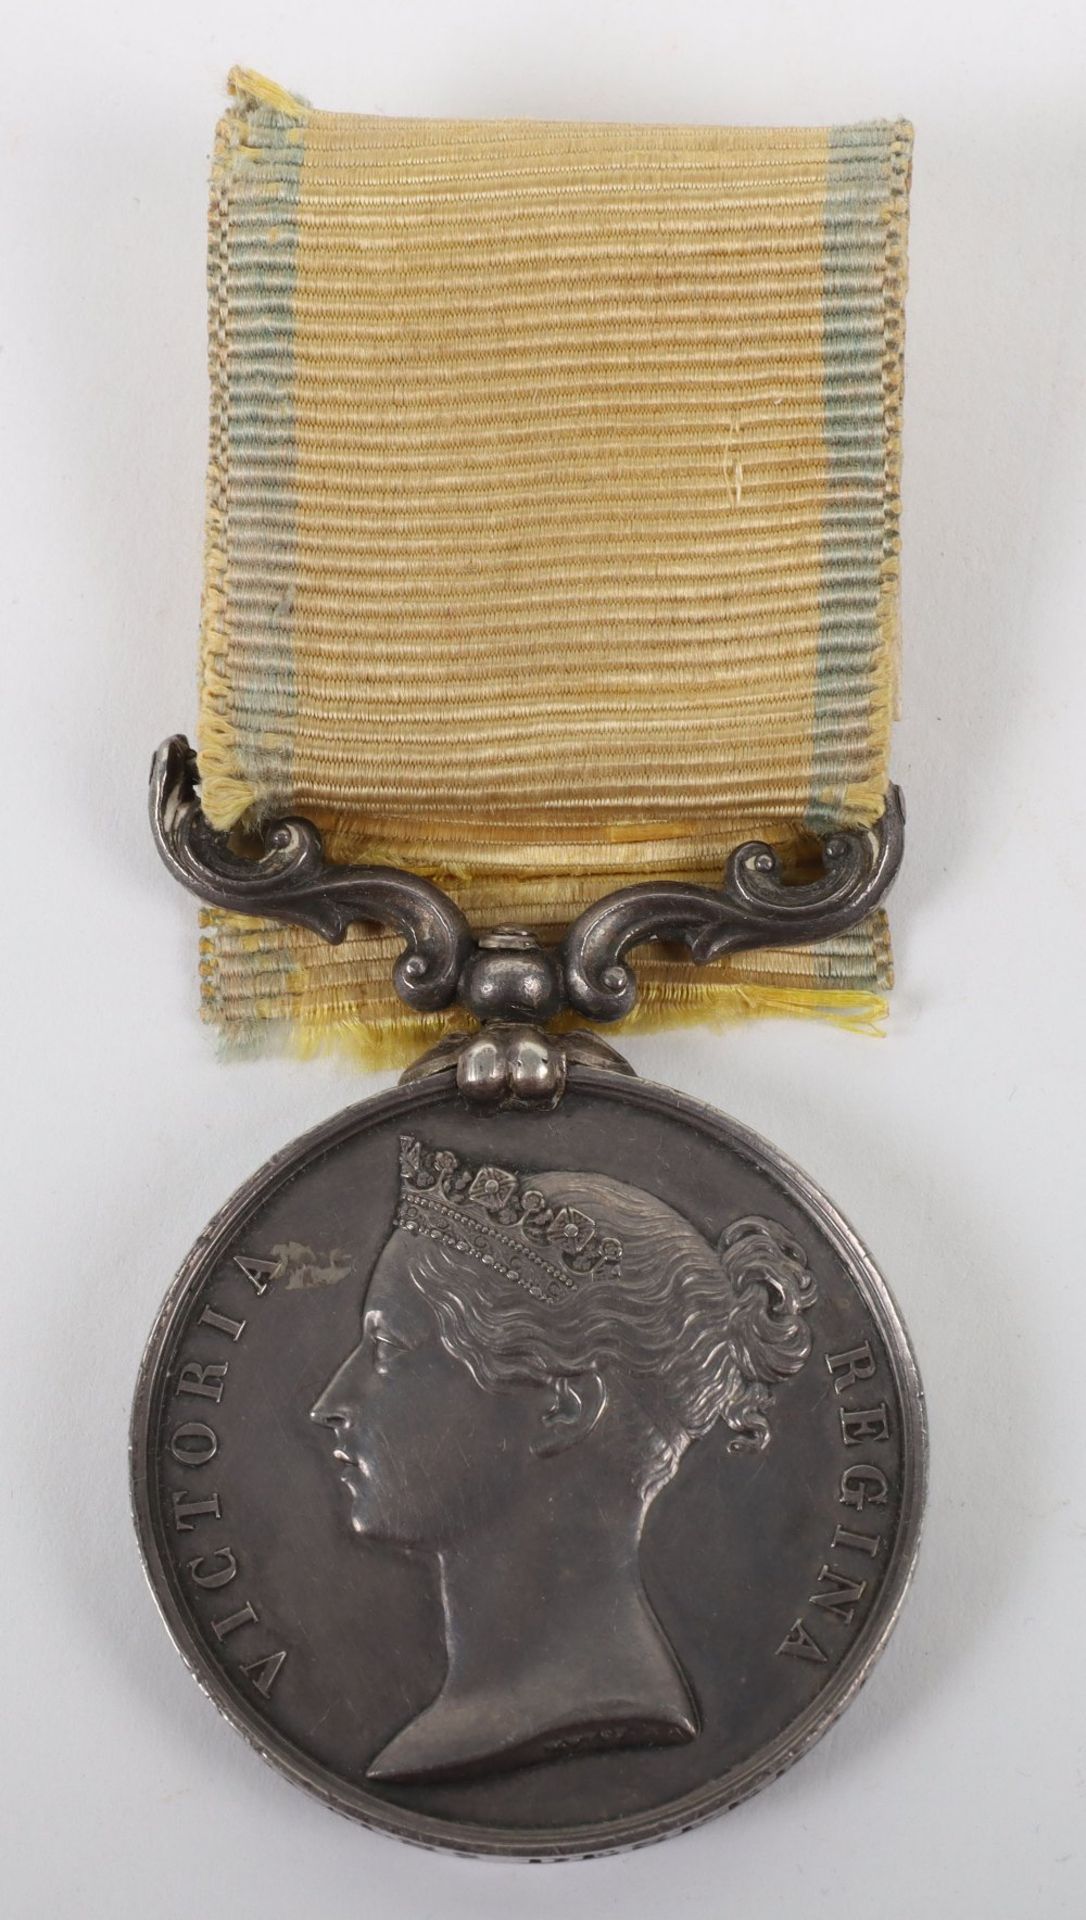 Victorian Baltic 1854-55 Medal Naval Engineer of HMS Desperate and HMS Pylades